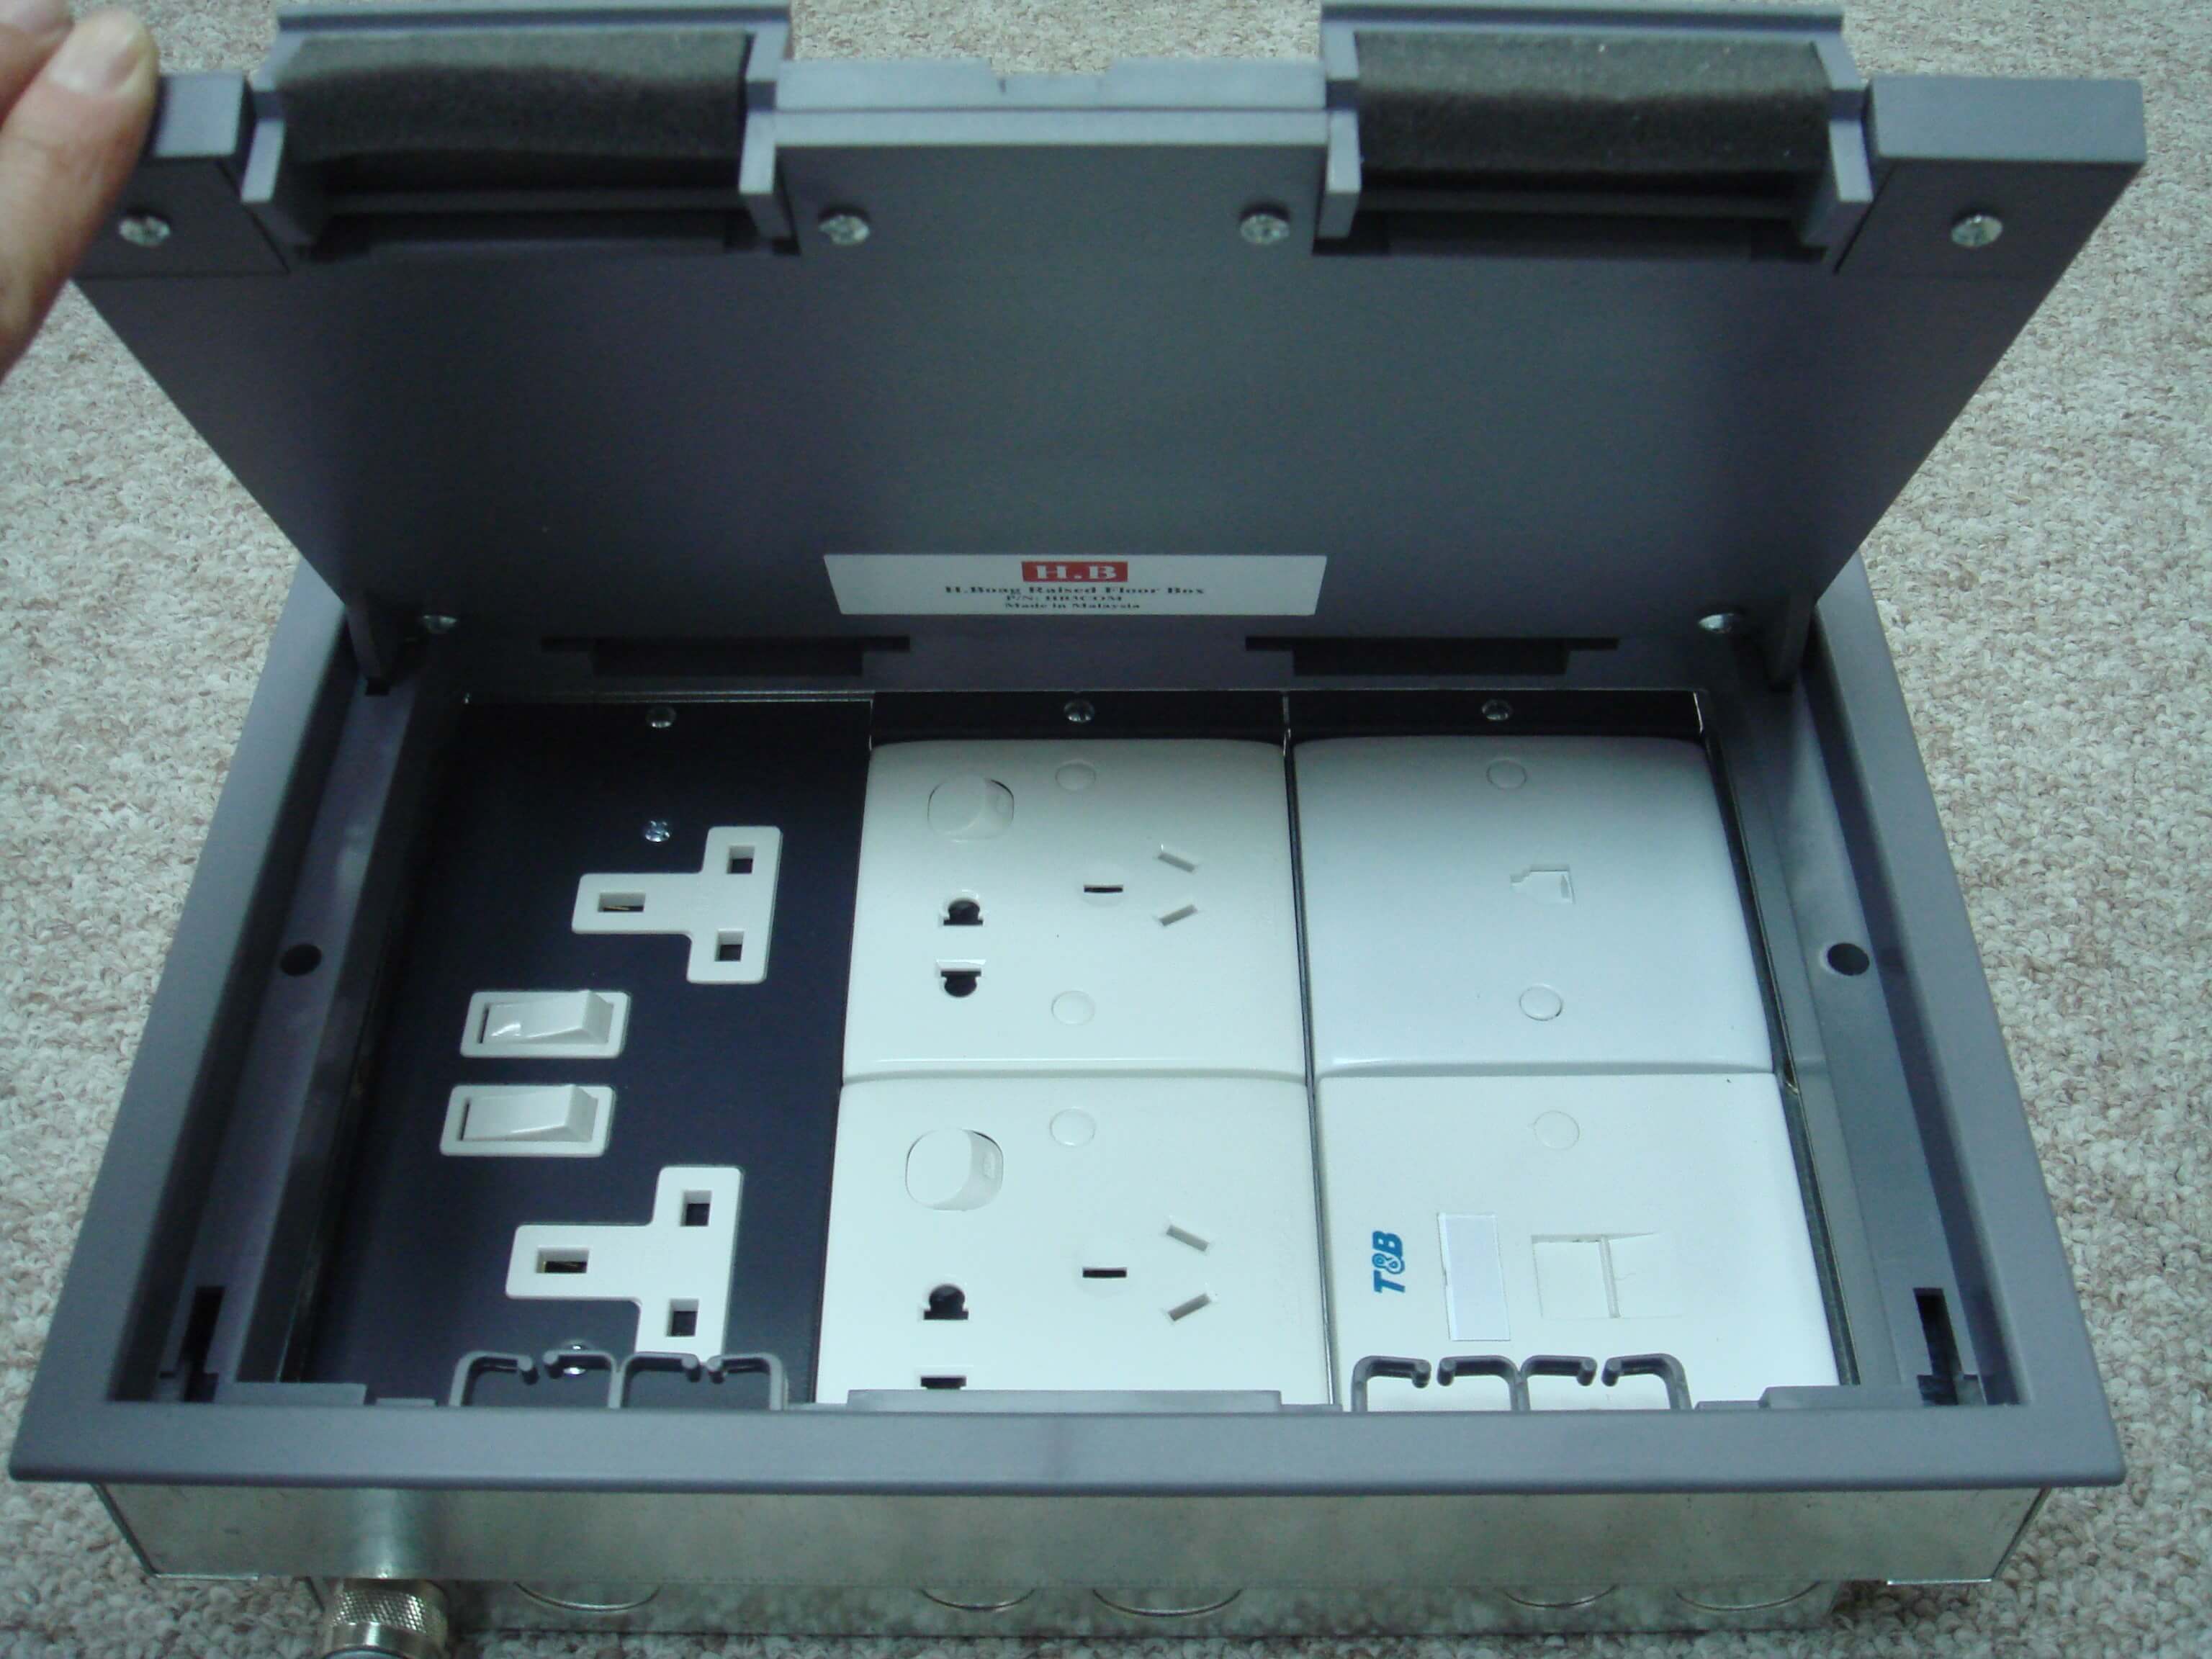 H.Boag Raised Floor Box (3 Compartment) with Accessories